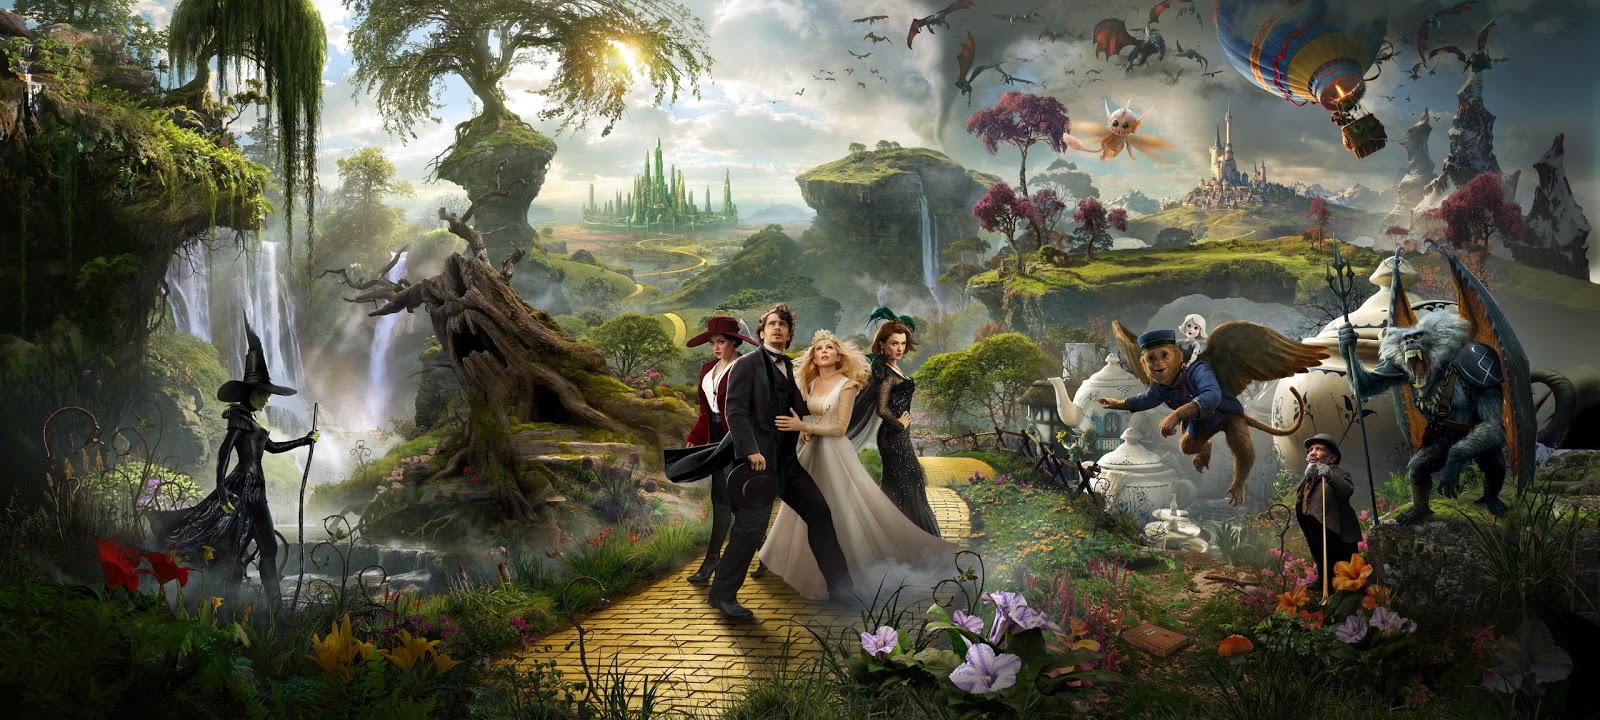 Fiction Oz The Great And Powerful Desktop Wallpaper From Wizard Of